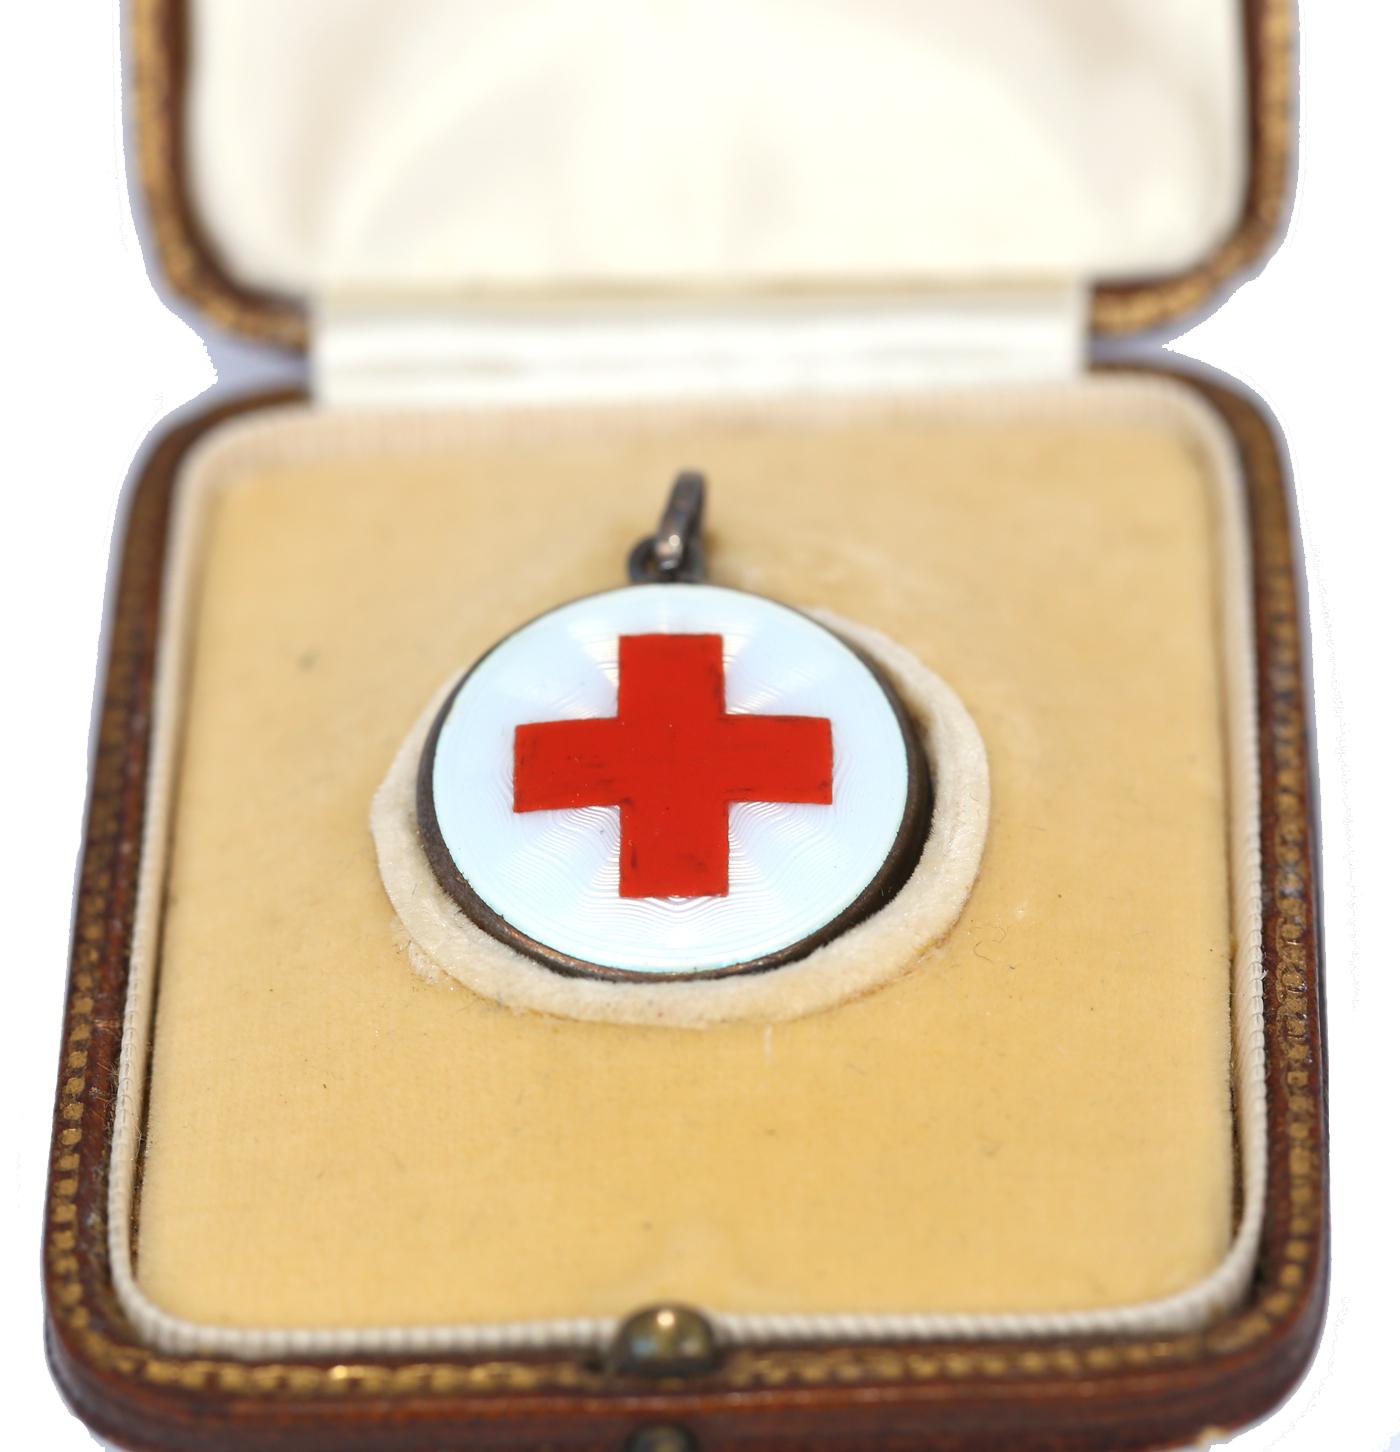 Red Cross Enamel Pendant Original Box, Created in 1920. Fine white enamel pendant in the original case by John Hall & C Manchester and Liverpool. Apart from gorgeous quality, this fine jewelry item has a historic significance. It was given to